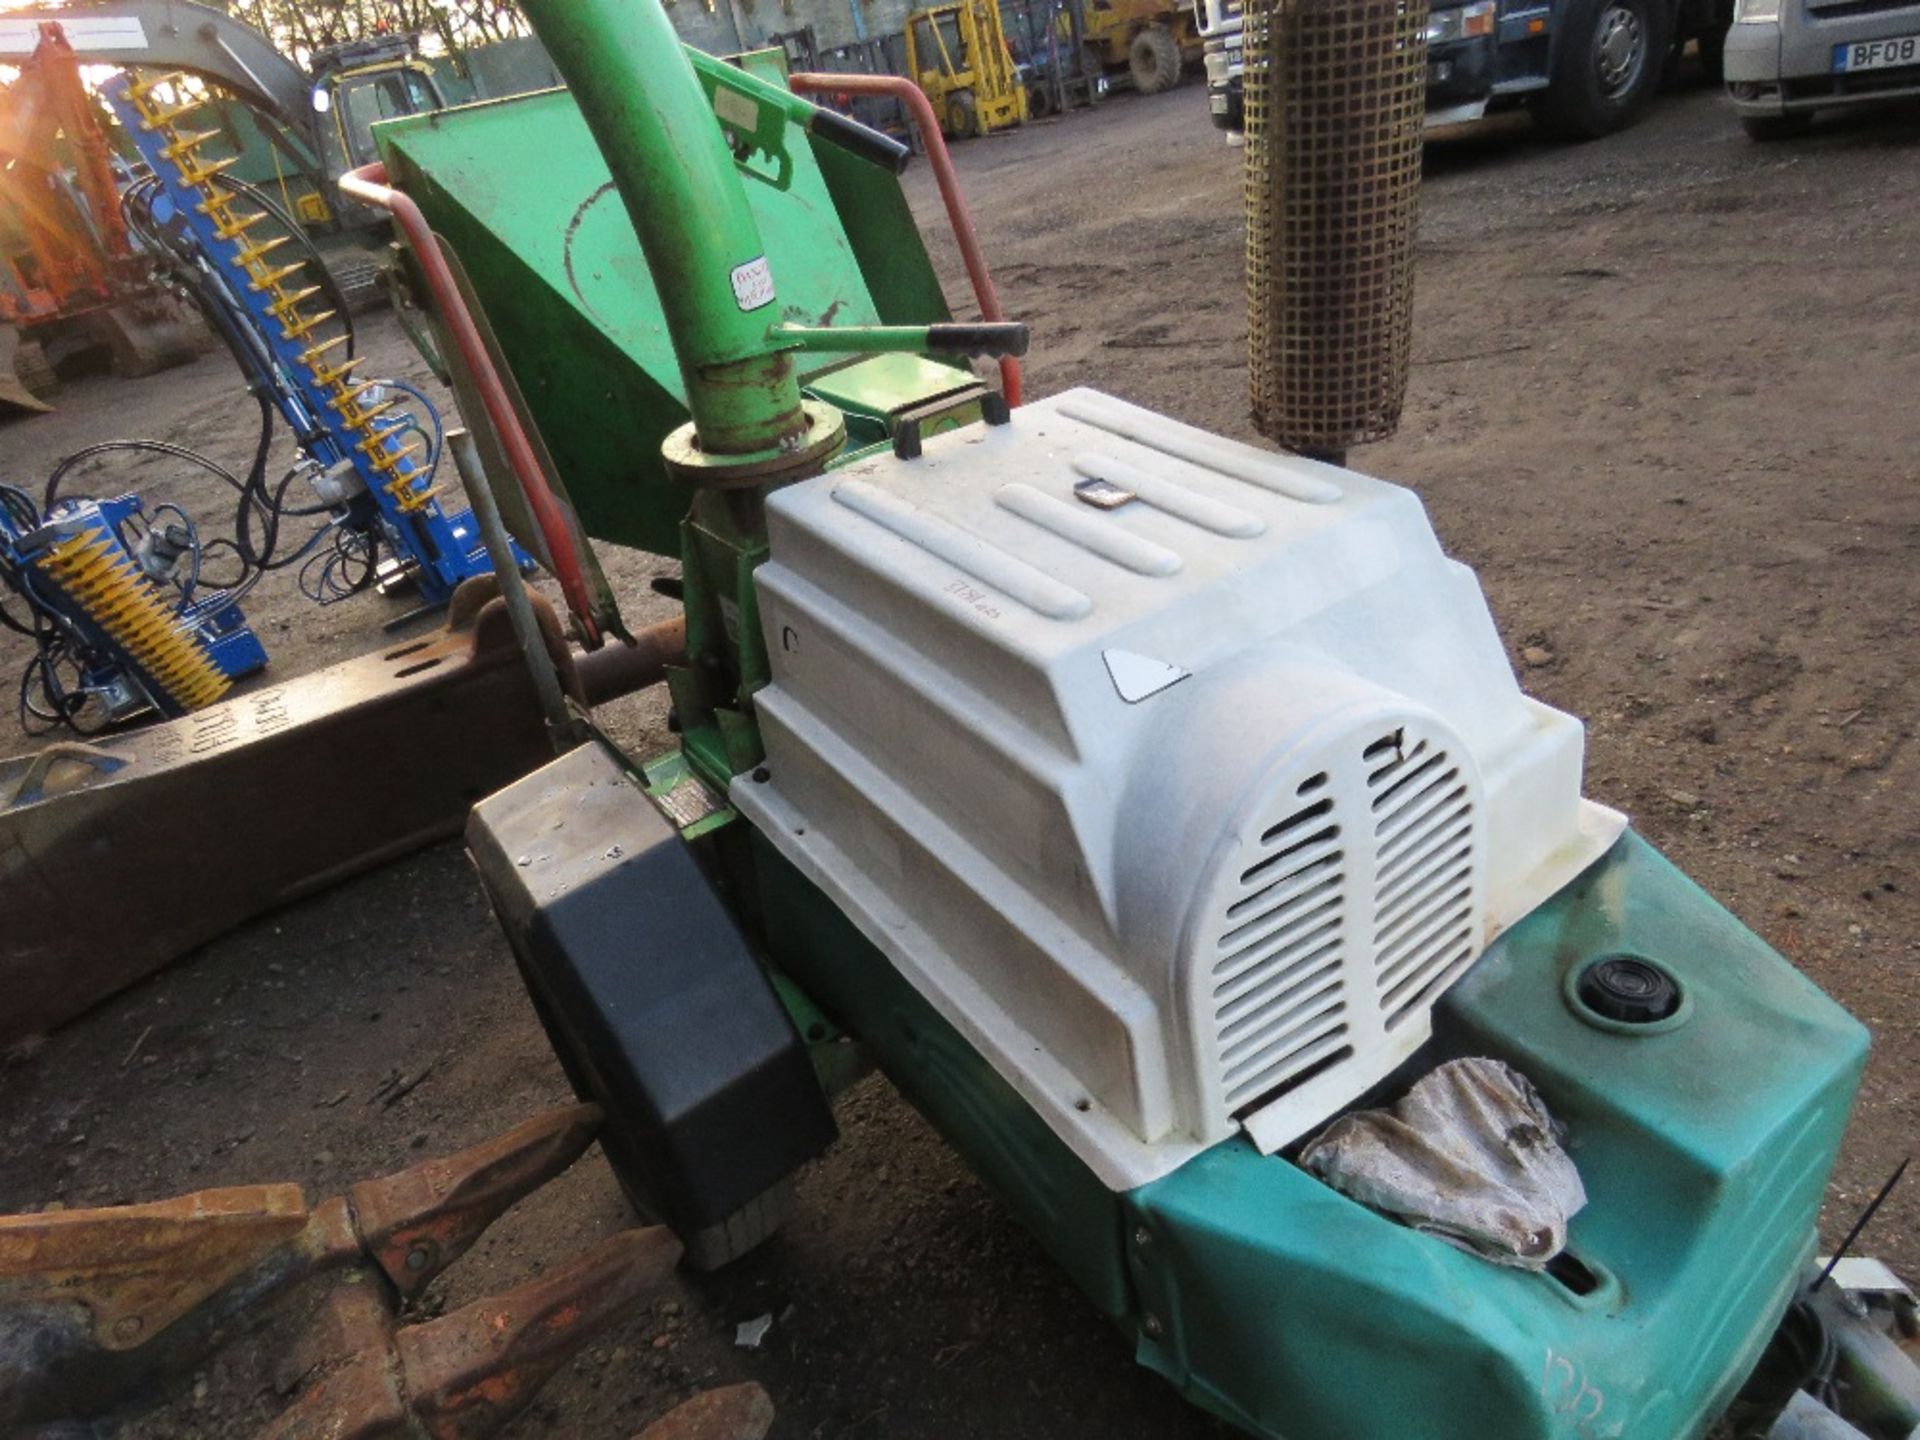 GREENMECH EC150/30 TOWED SHREDDER YEAR 2002. 3181 REC HRS. DIESEL ENGINE.WHEN TESTED WAS SEEN TO RUN